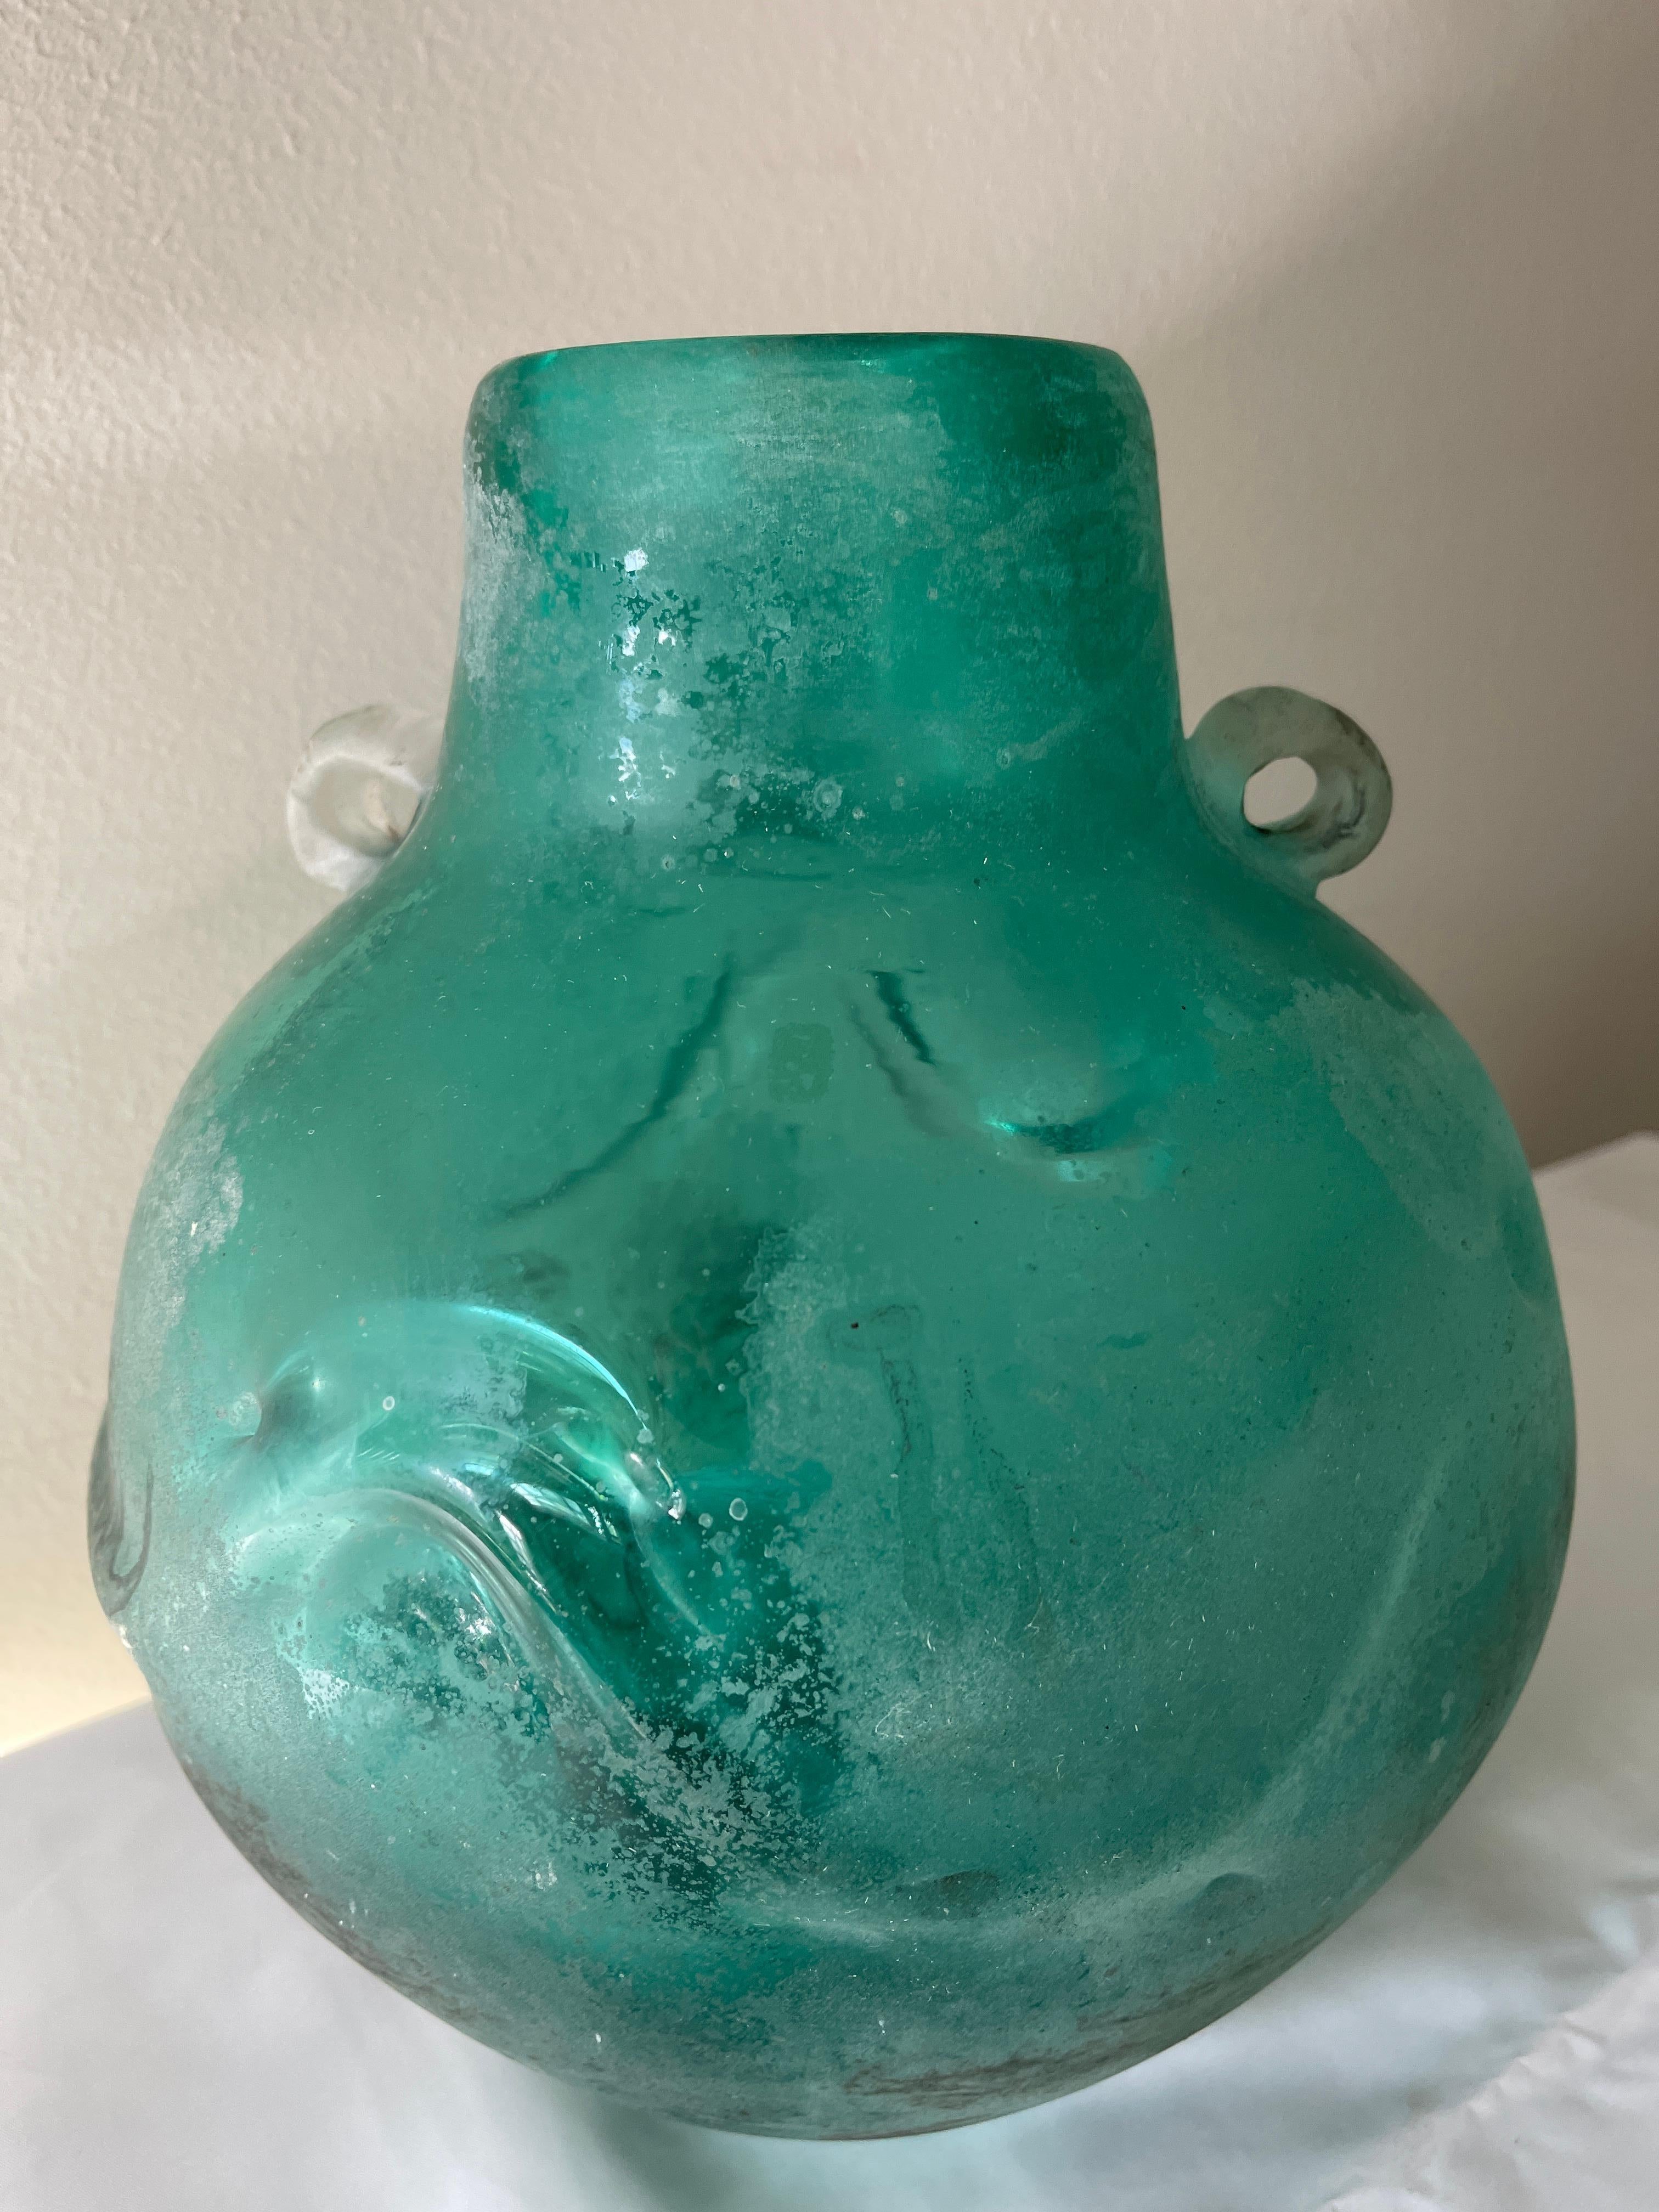 Large Italian Scavo Corroso glass urn vase with 2 handles and gorgeous raised wave design surrounding the middle. Mesmerising to look at!
This piece evokes the beautiful aquamarine sea, and is an Avalon favourite. 
Nice heavy weight to the piece.